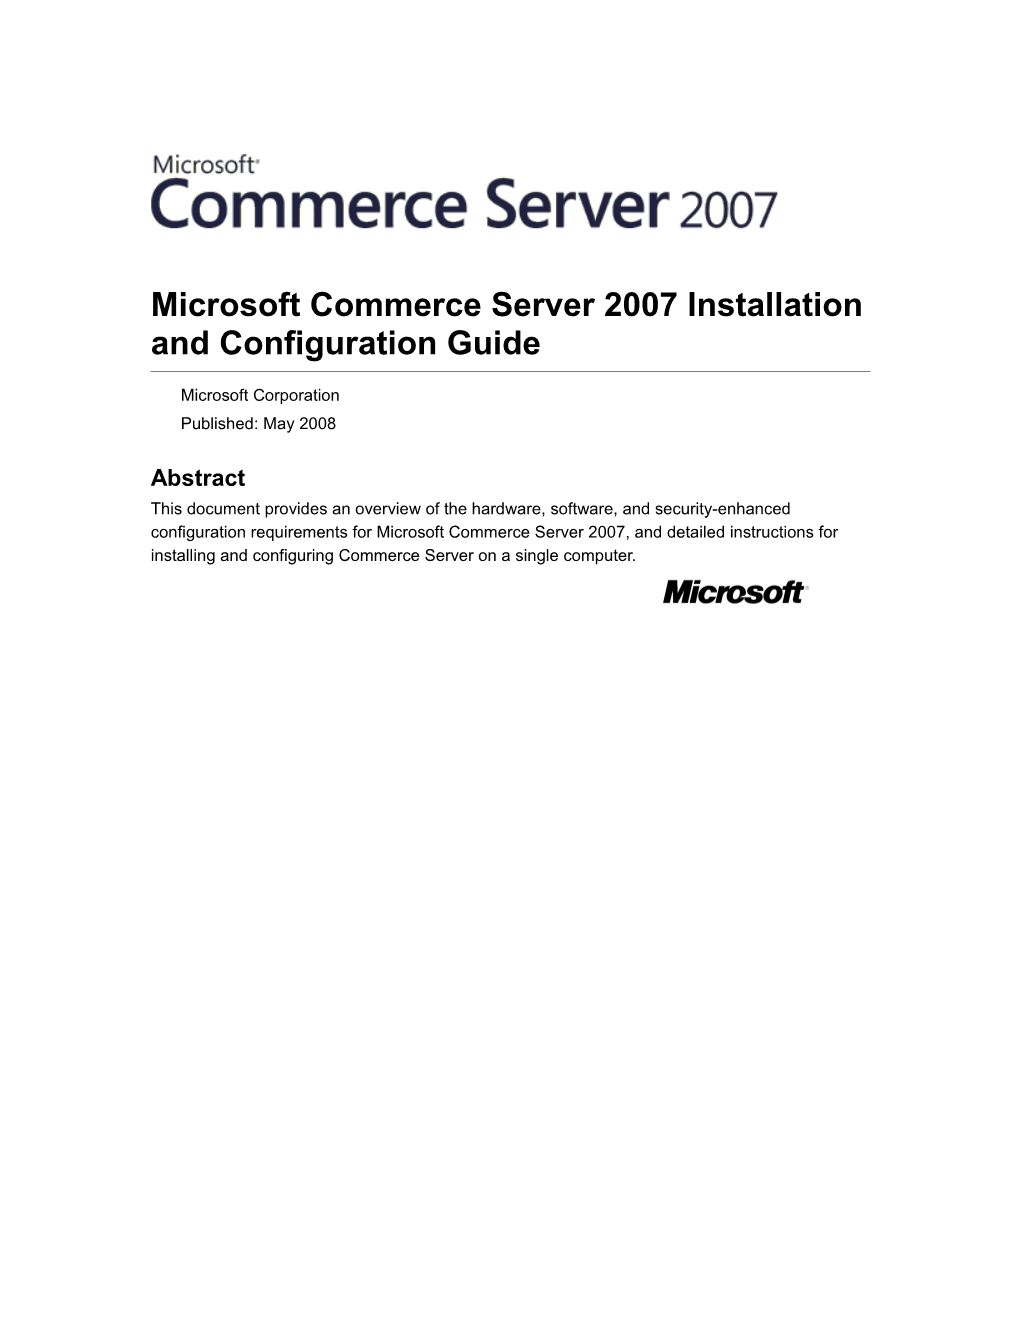 Microsoft Commerce Server 2007 Installation and Configuration Guide